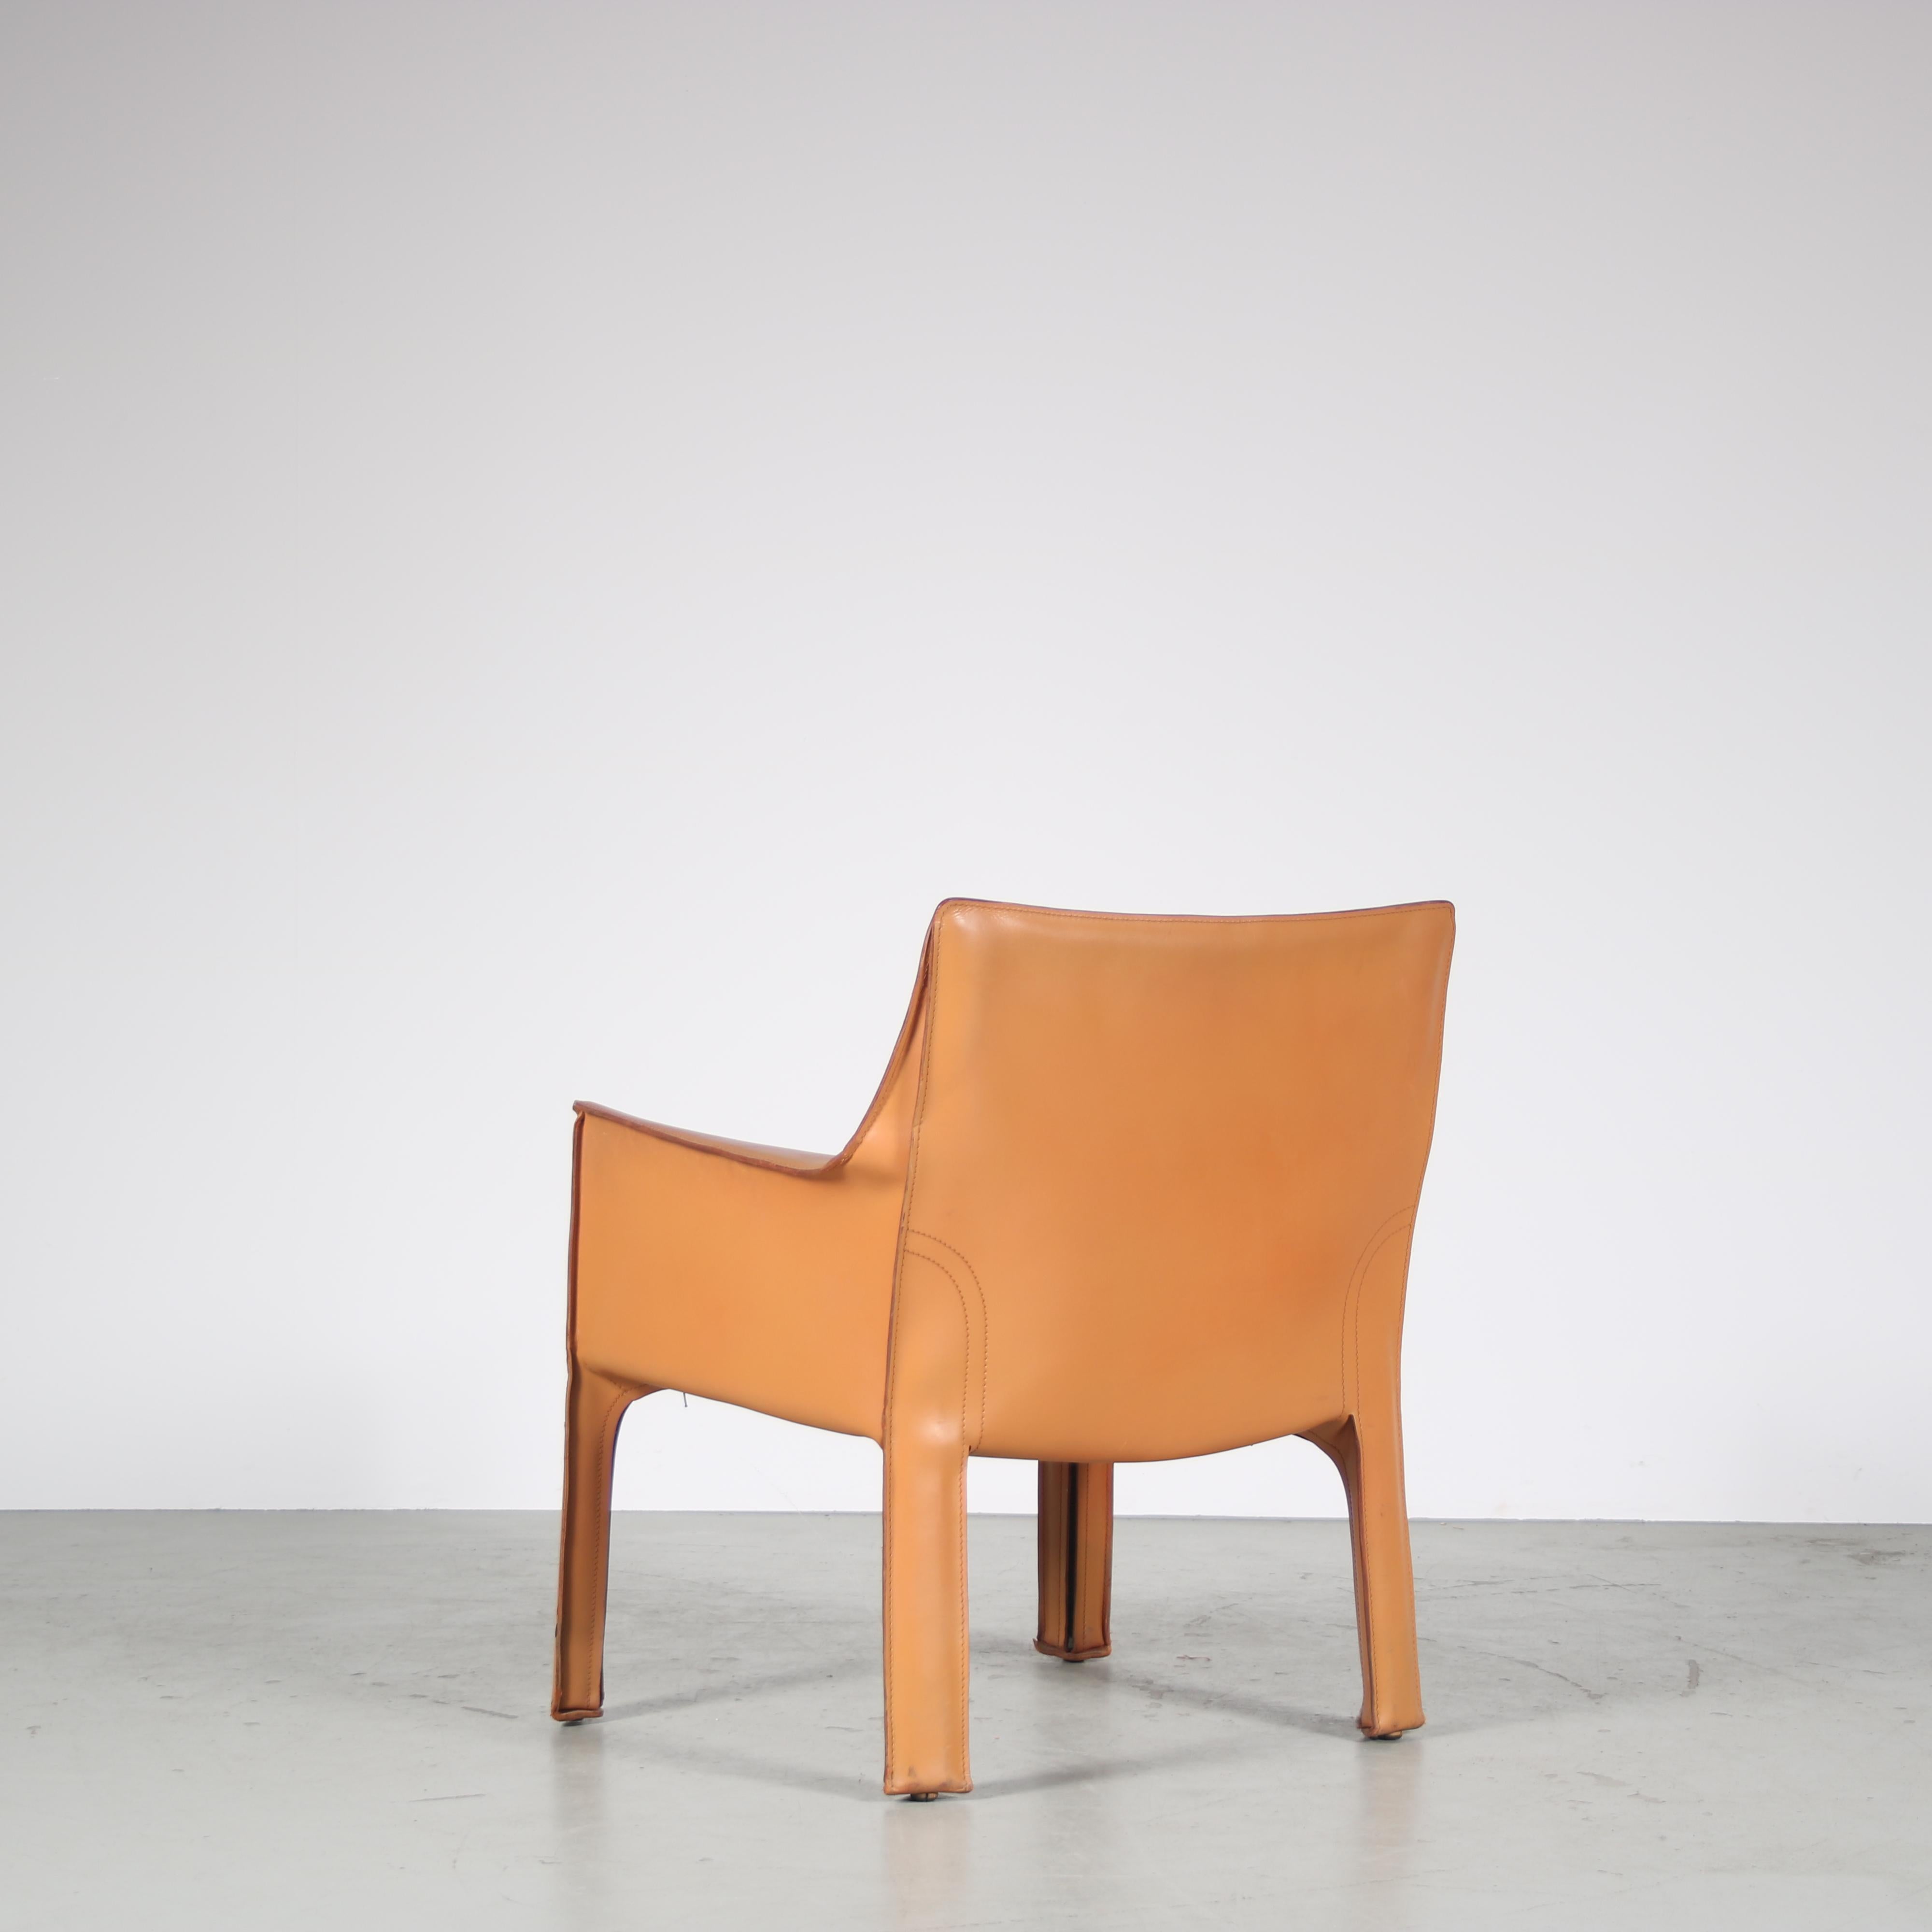 Late 20th Century Mario Bellini “Cab 414” Chair for Cassina, Italy 1980